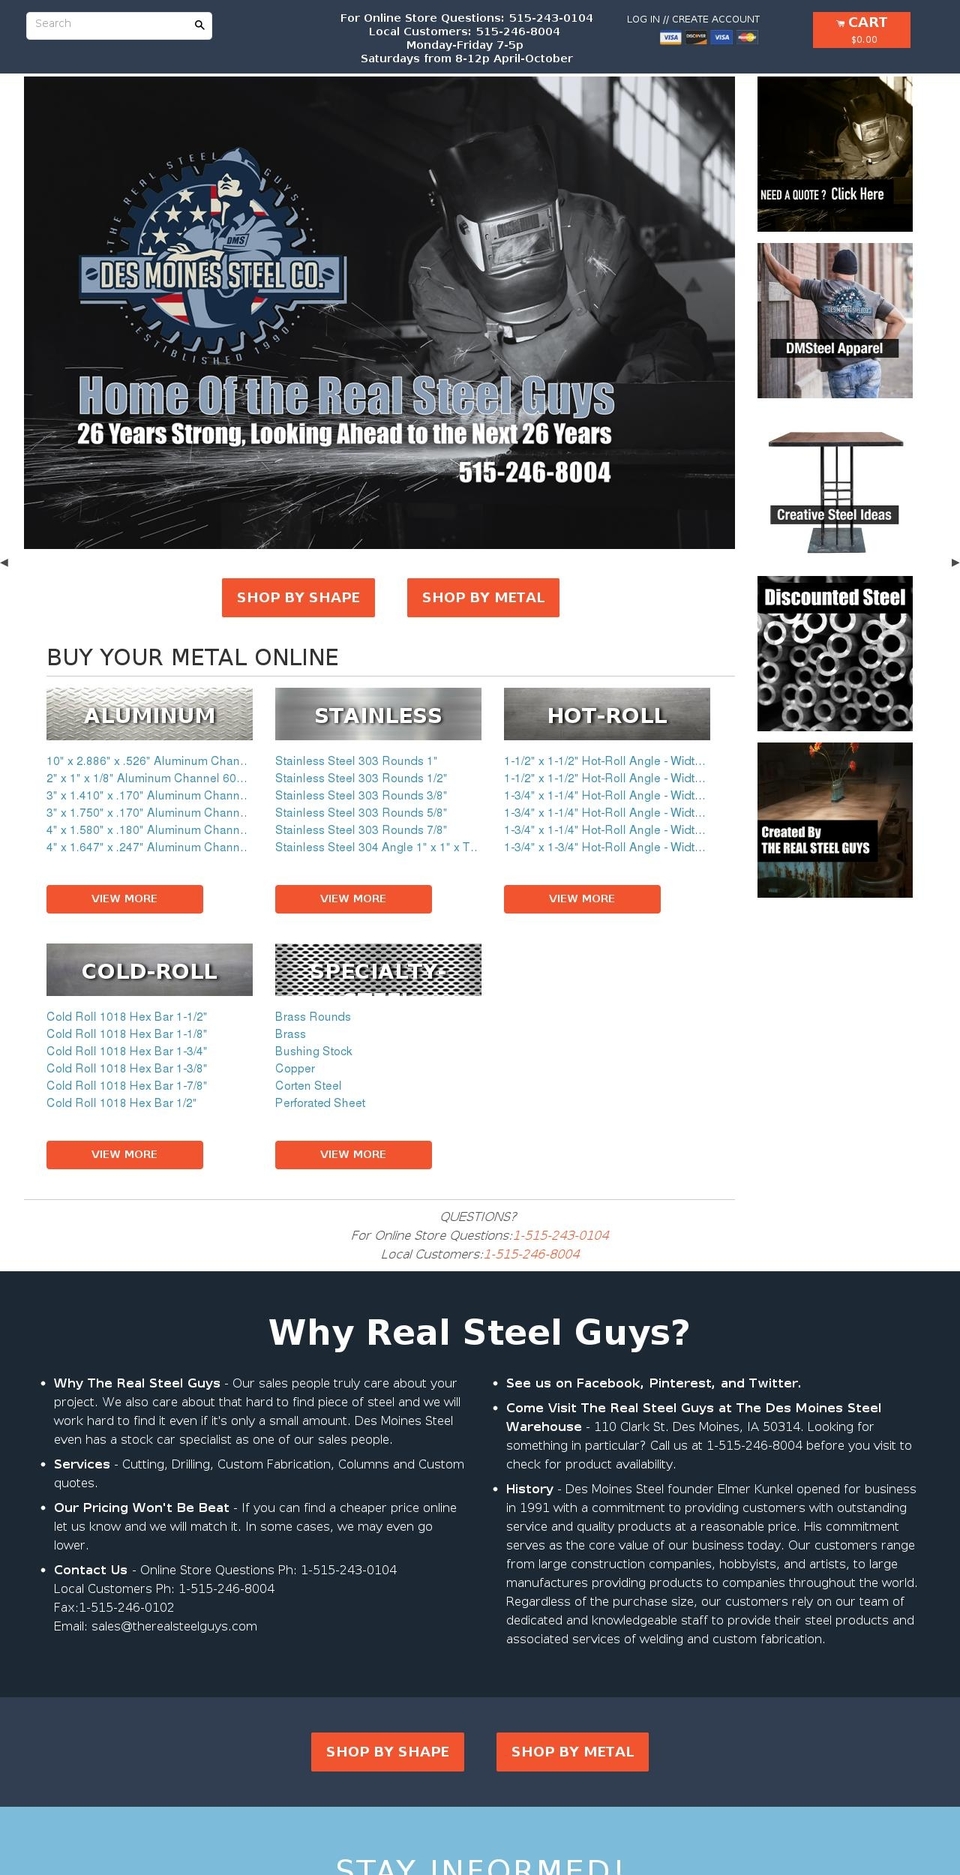 Athens Shopify theme site example dmsteel.com